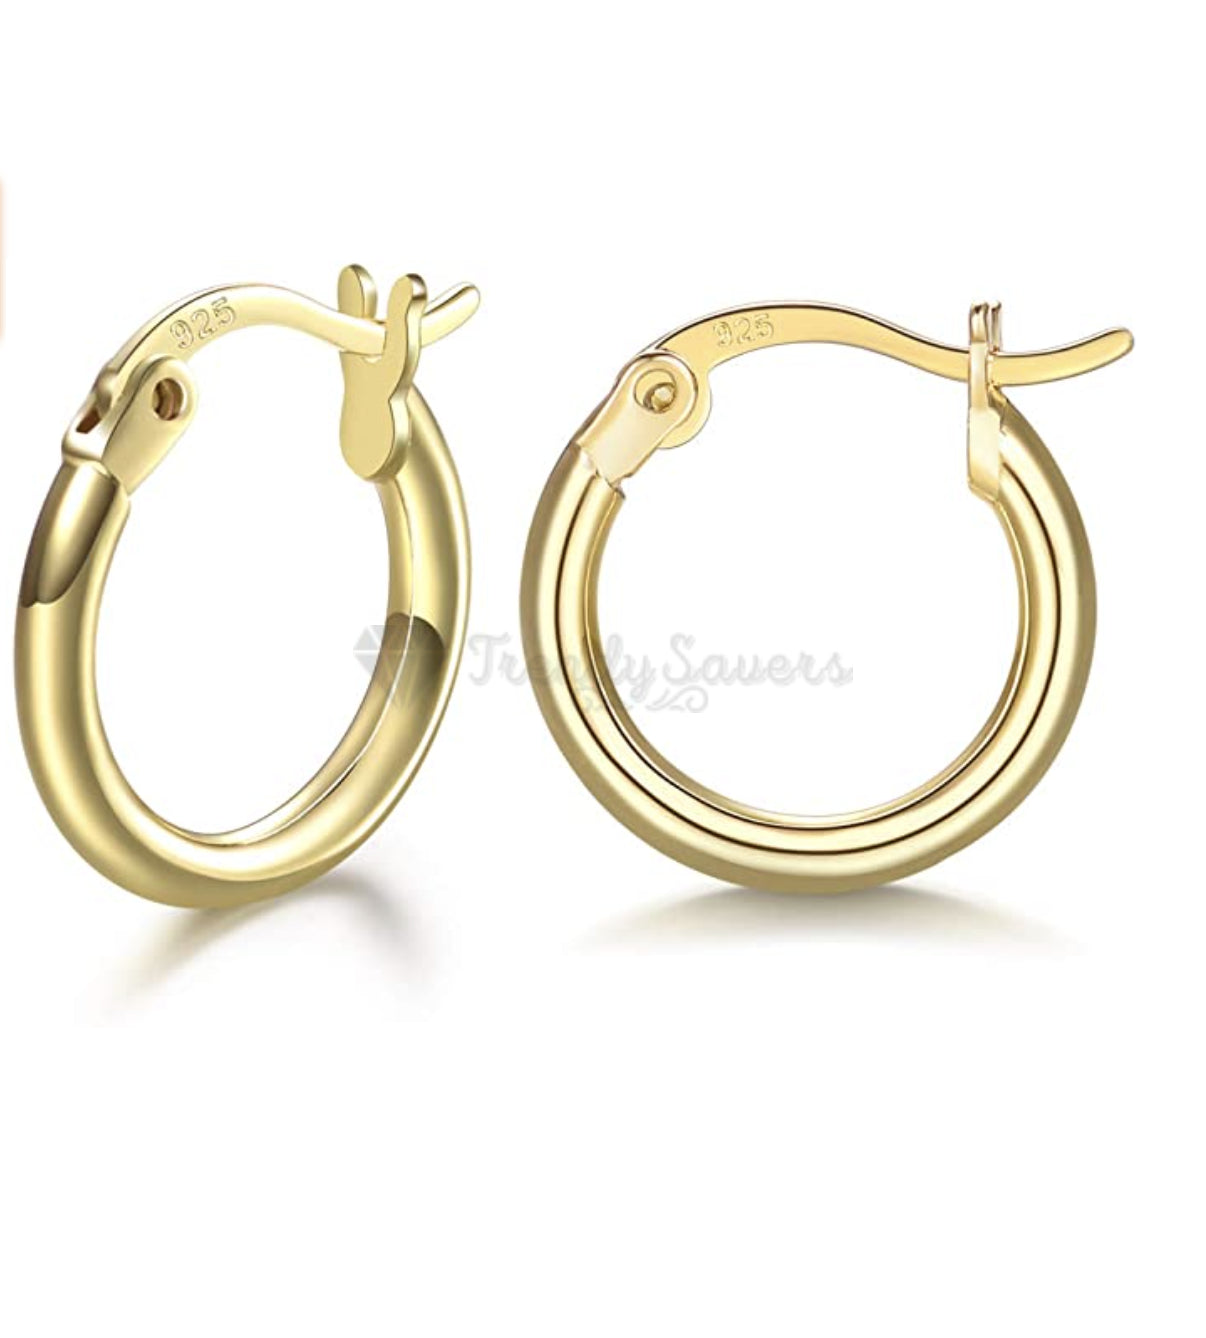 13MM Small Post Round Yellow Gold Clicker Hoop Cartilage Earrings Unisex Jewelry